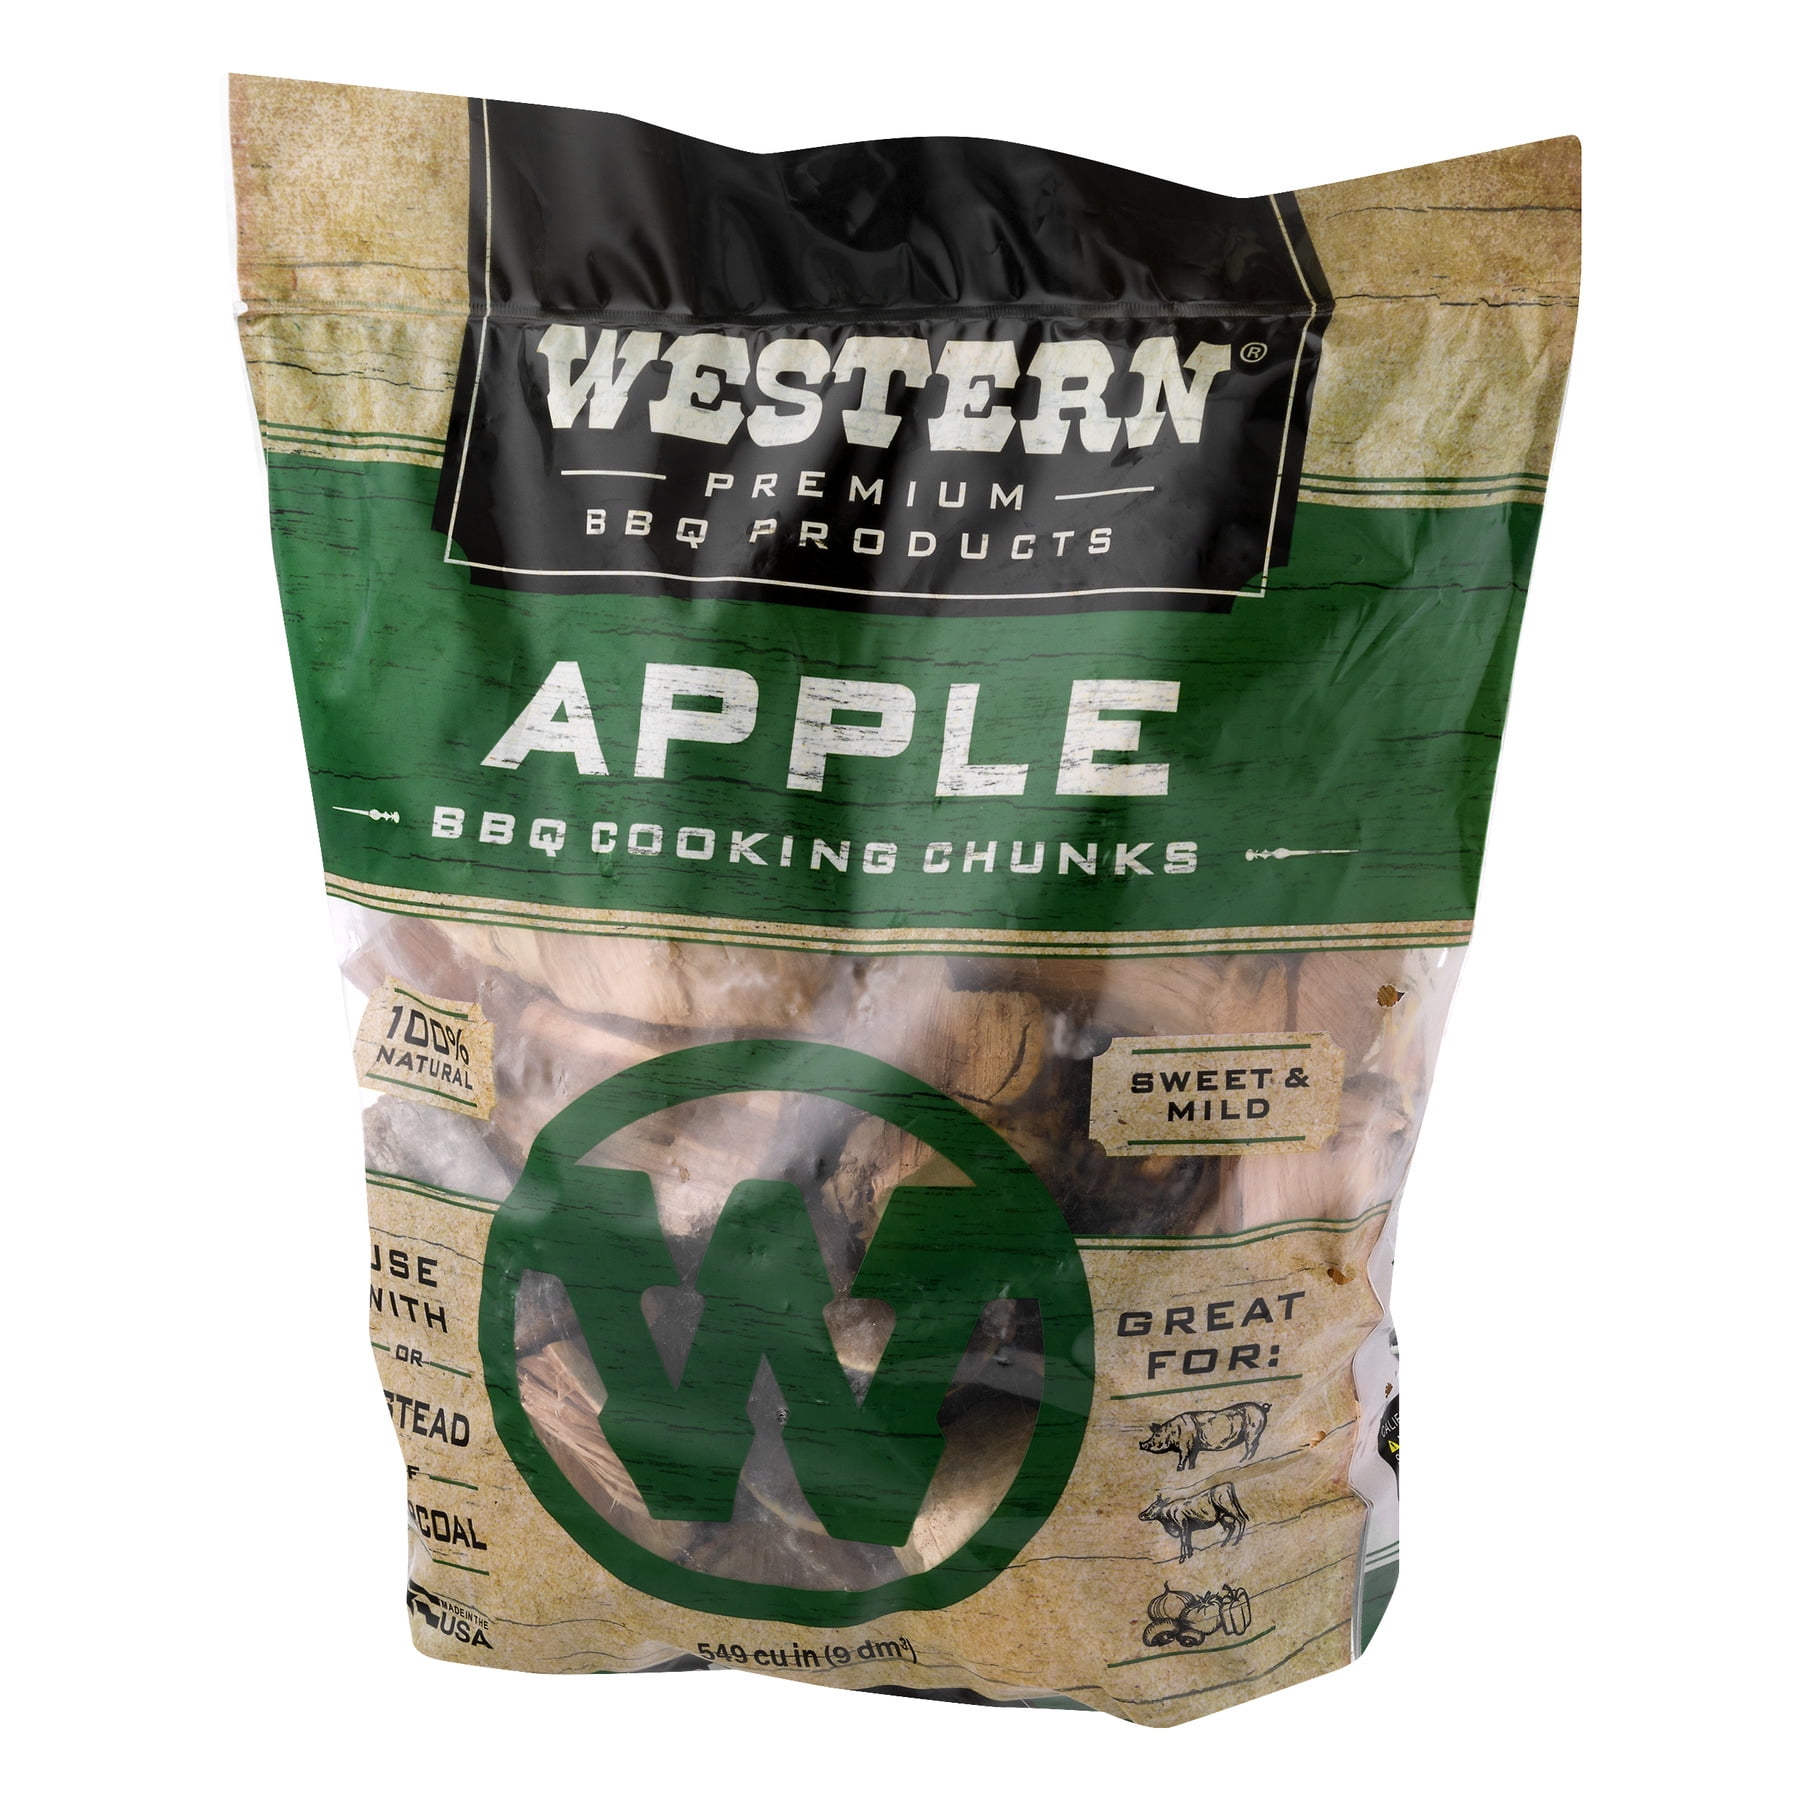 Apple BBQ Cooking Chunks for Western Premium Pizza